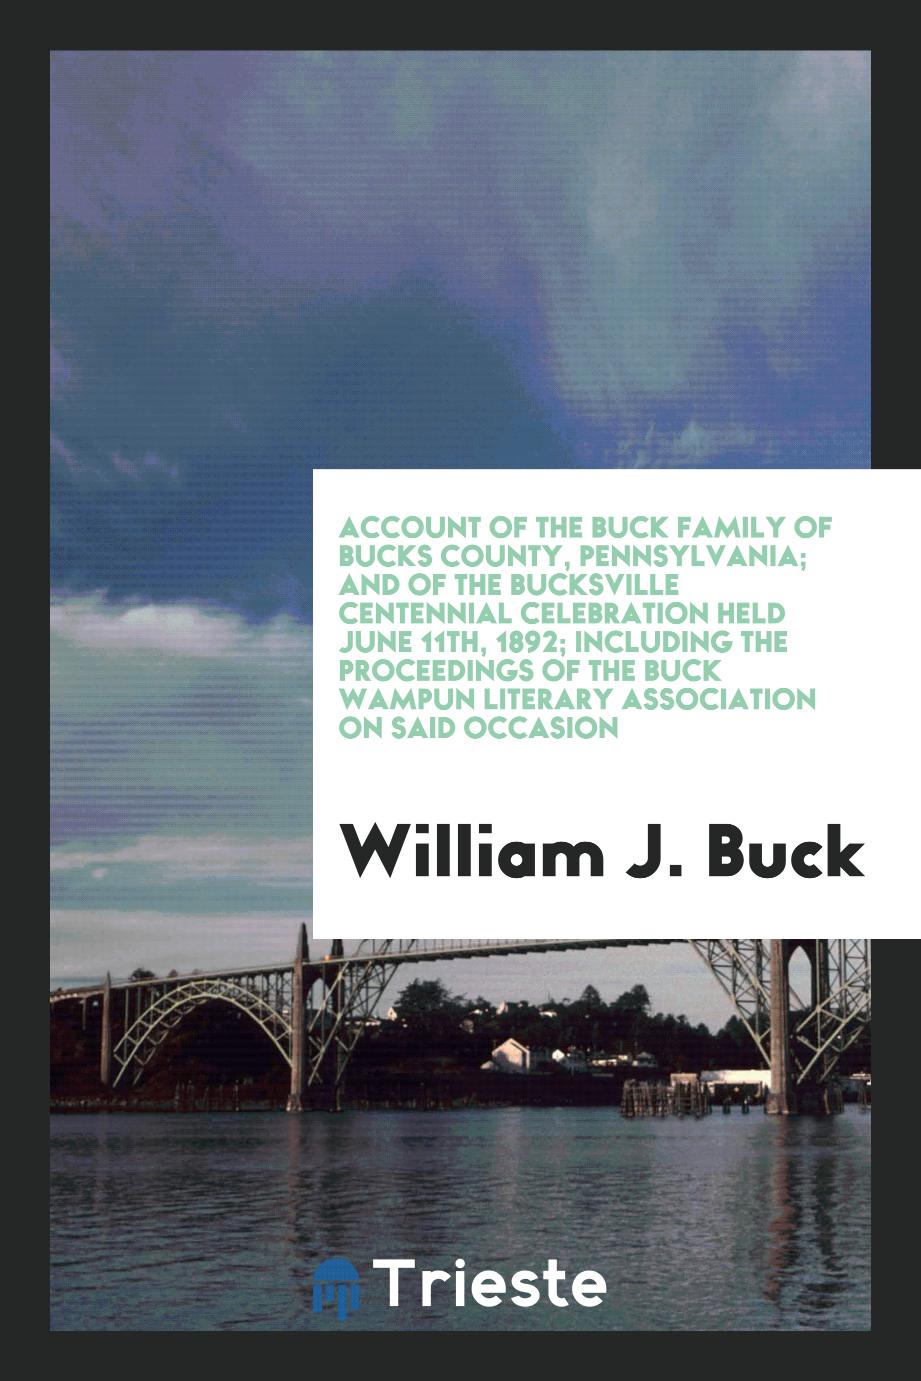 Account of the Buck family of Bucks County, Pennsylvania; and of the Bucksville centennial celebration held June 11th, 1892; including the proceedings of the Buck wampun literary association on said occasion